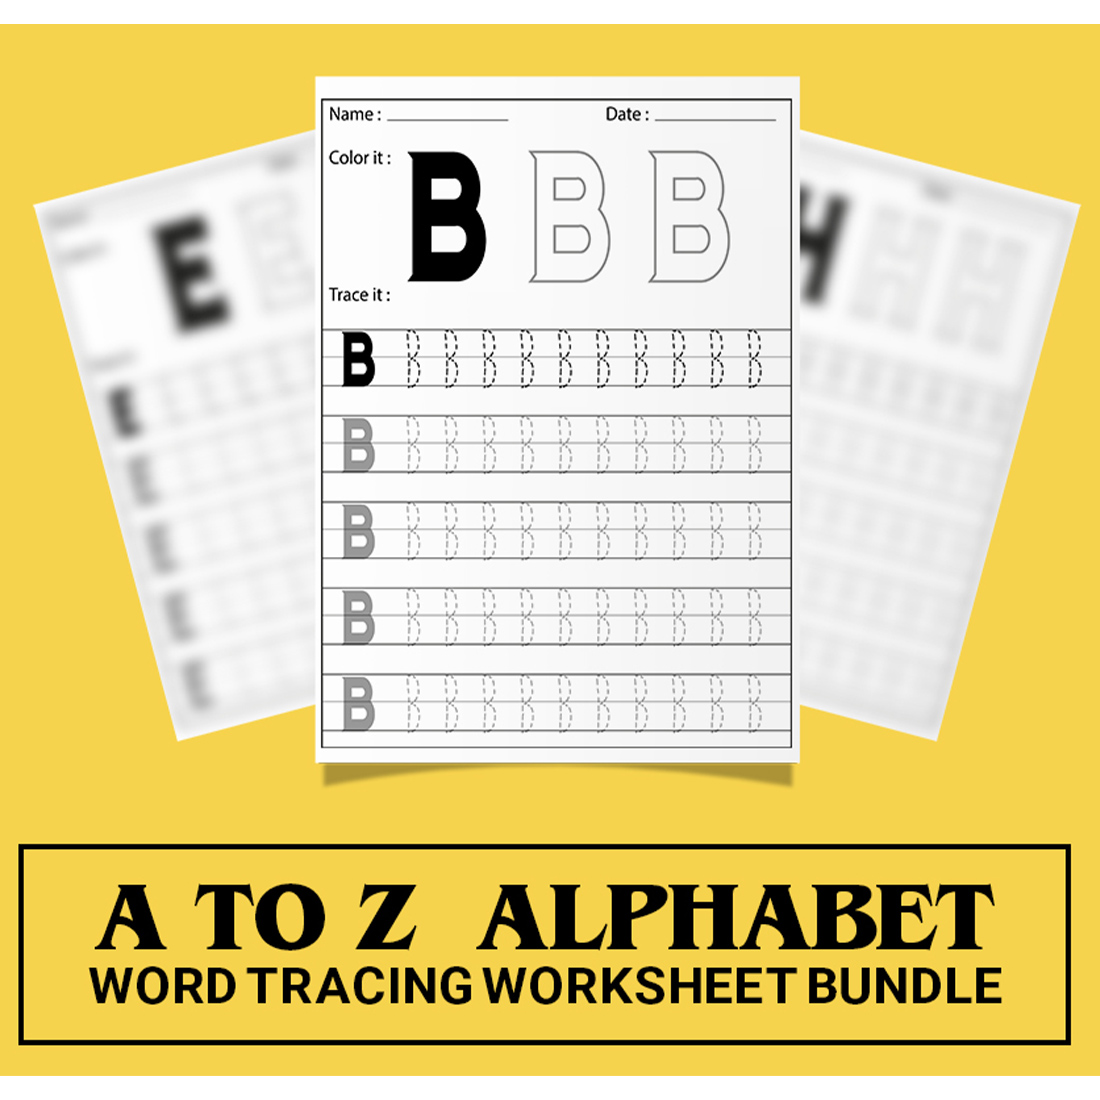 A selection of images of amazing sheets for learning letters